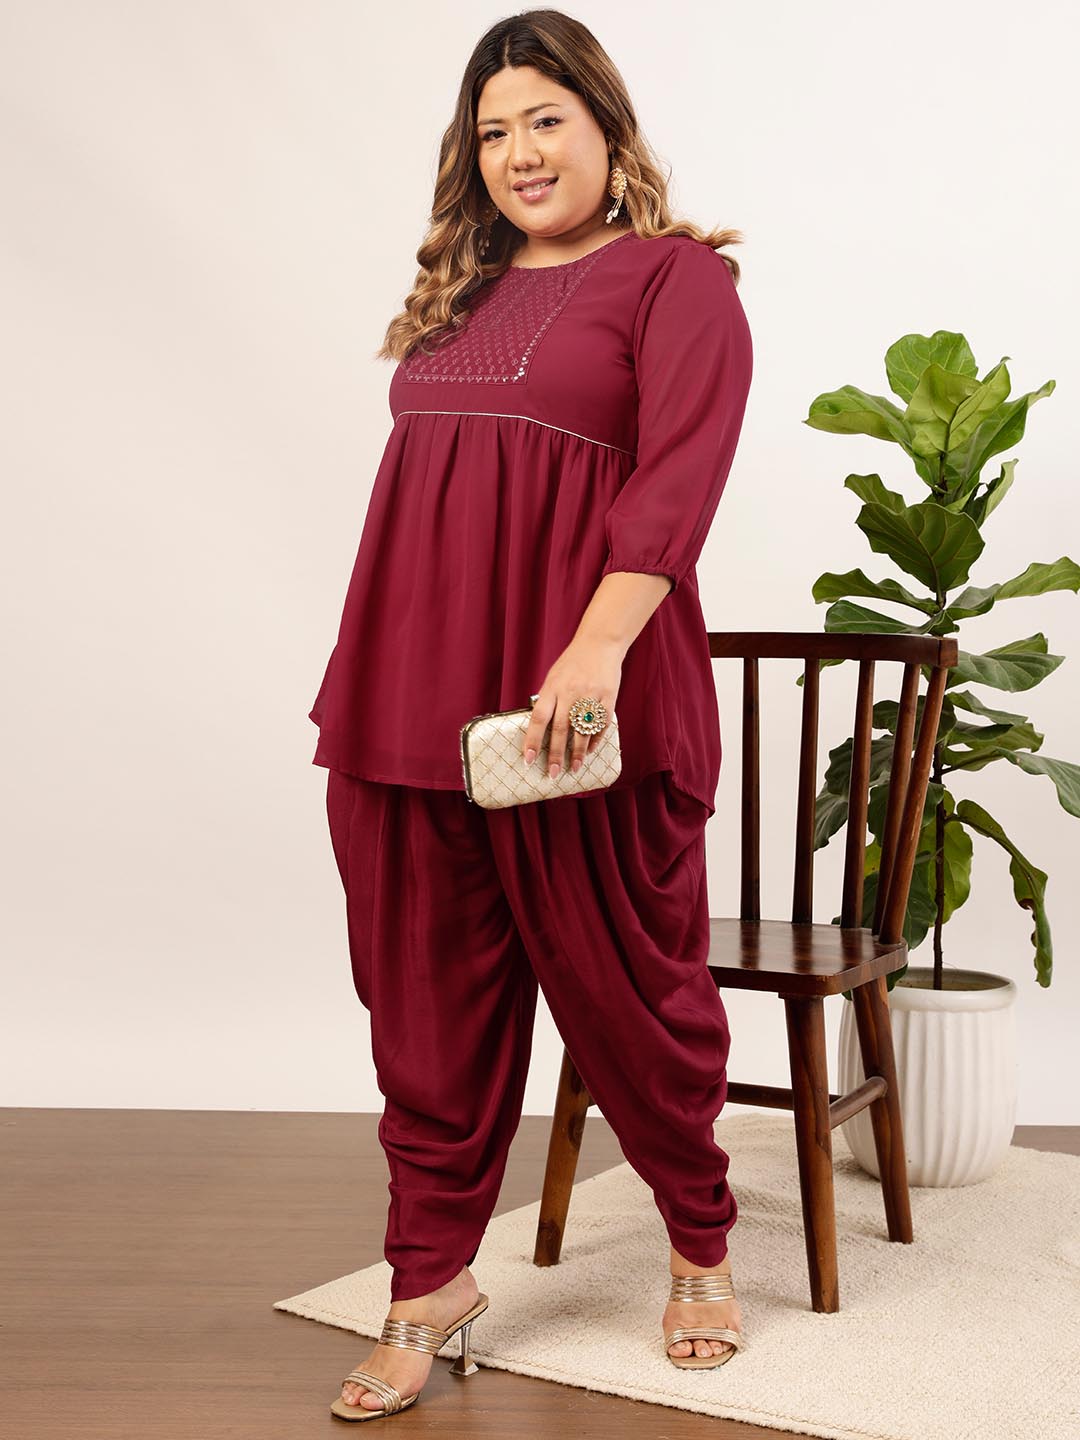 Buy DISOLVE Women Loose fit Dhoti Salwar Pant (Harem Pant) Free Size Free  Size (28 Till 34) Pack of 1 Solid Maroon Color at Amazon.in